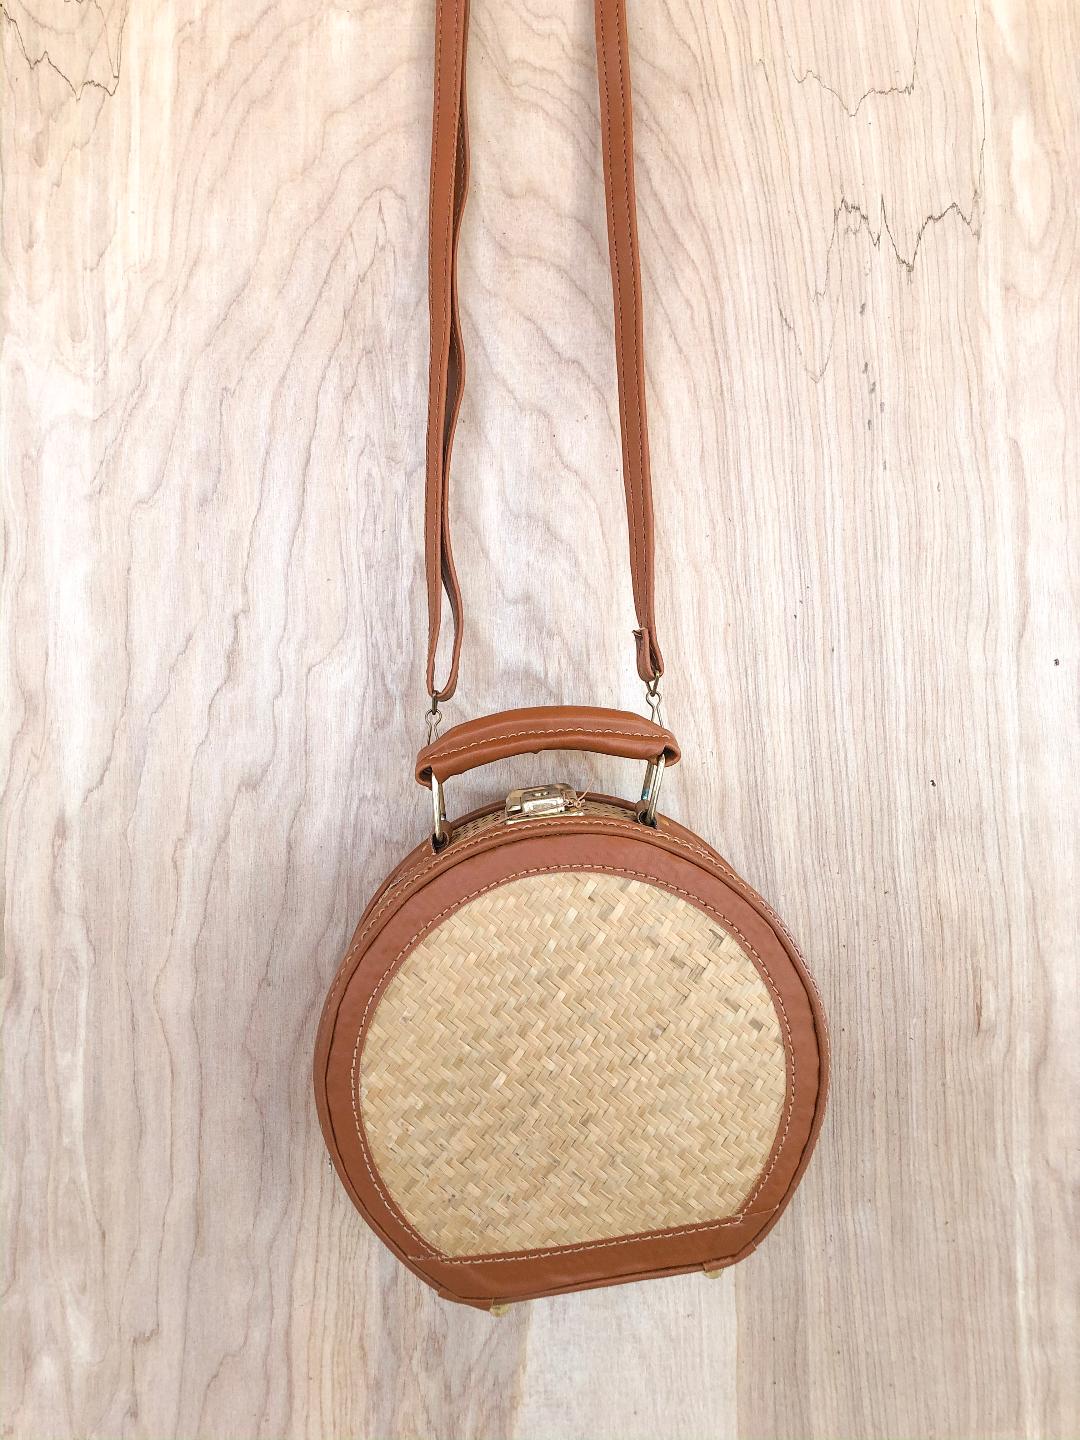 Resort Classic Small Round Wicker and Cognac Bag - Giddy Up Glamour Boutique